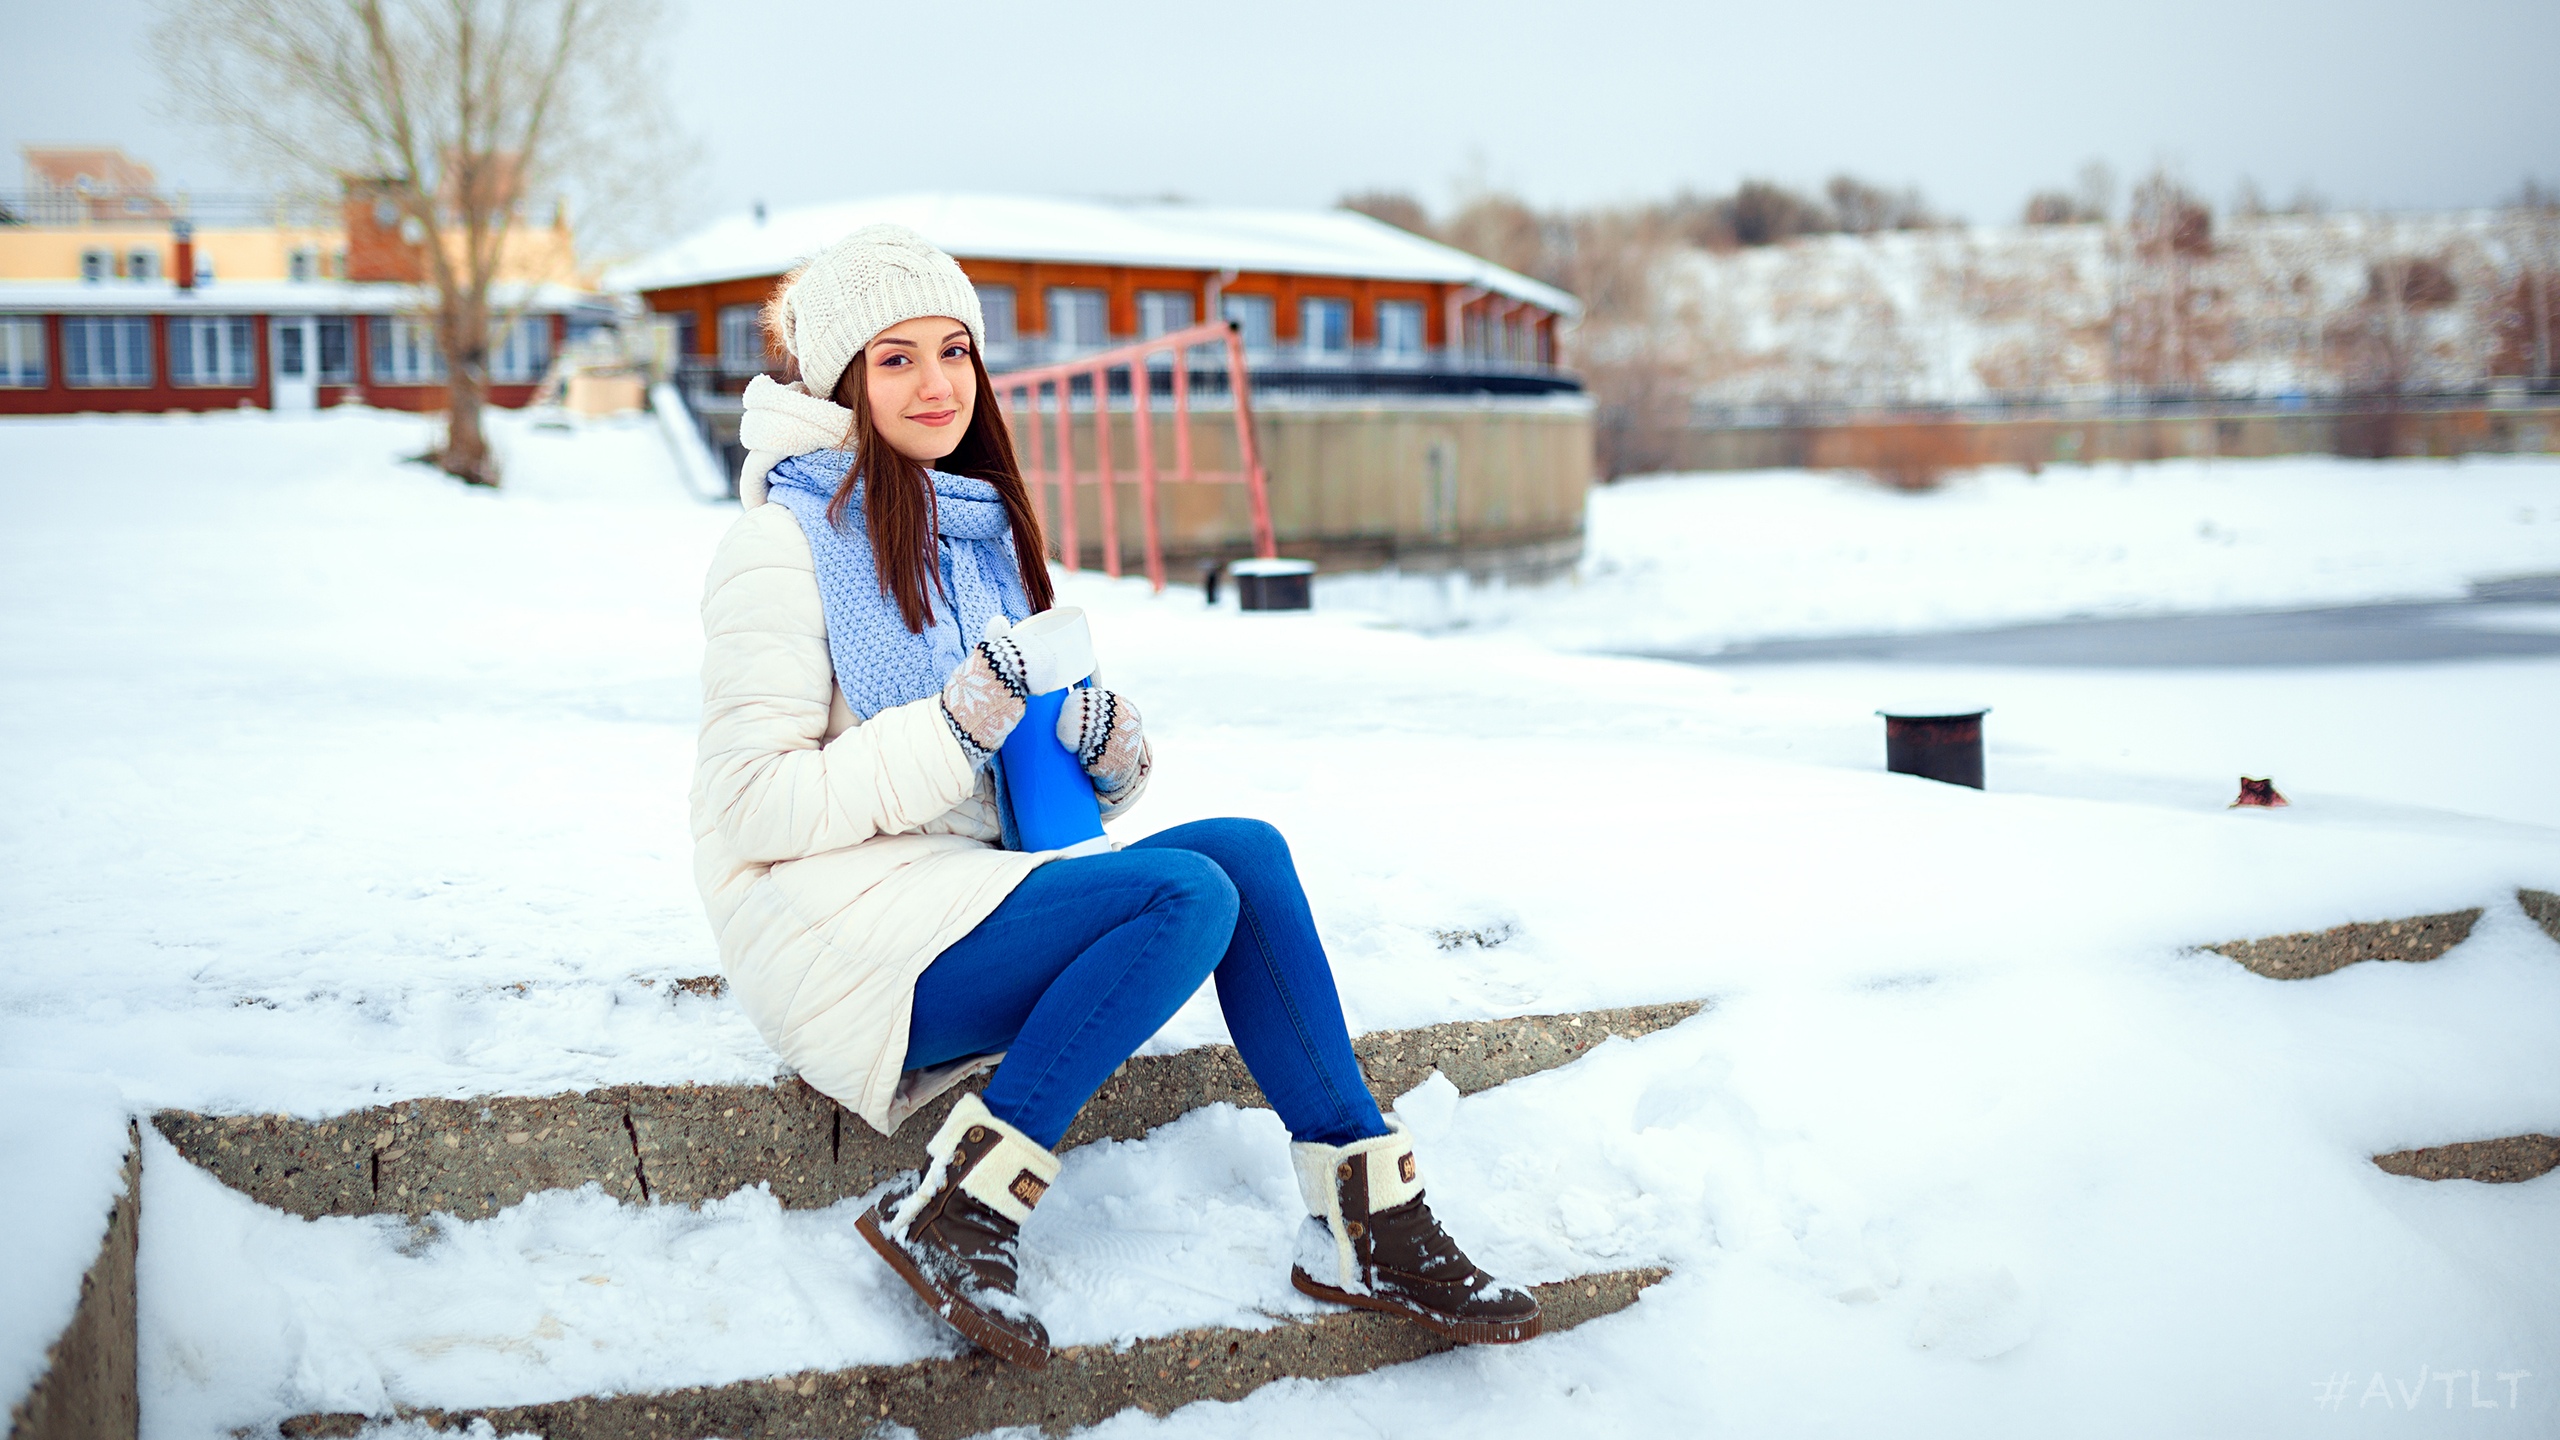 Women Model Brunette Looking At Viewer Smiling Woolly Hat Jacket White Jacket Jeans Scarf Boots Sitt 2560x1440